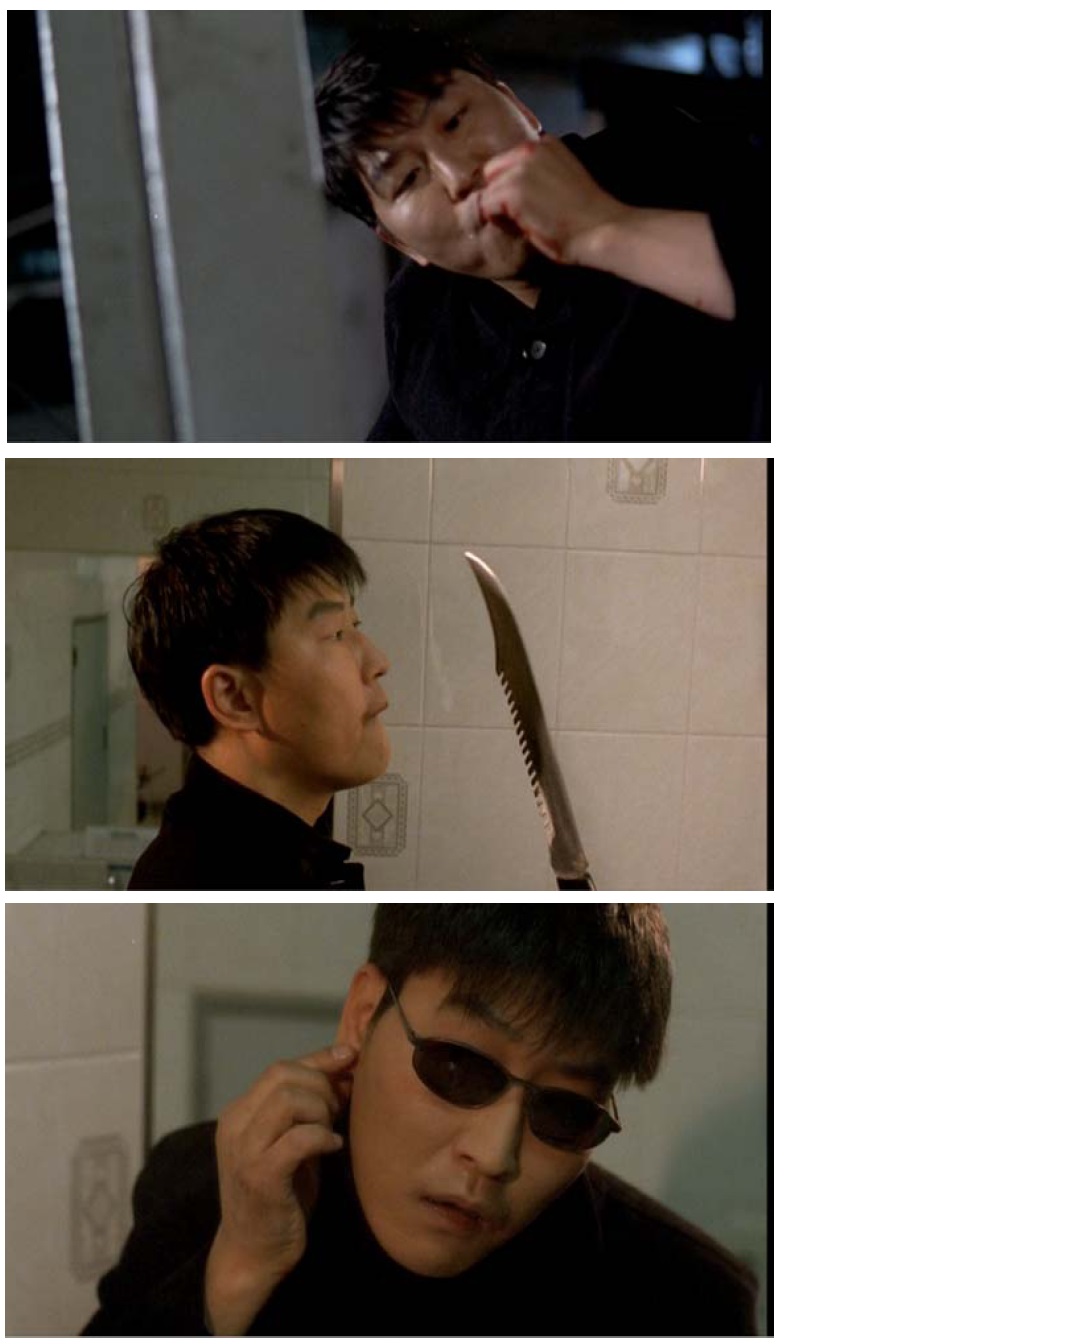 Film stills from the DVD Number 3 (1997, Kang Woo-Suk Productions). Top: Jo-pil eating a cockroach; middle: Jo-pil’s weapon of choice; bottom: Jo-pil calmly grooming himself in the mirror.